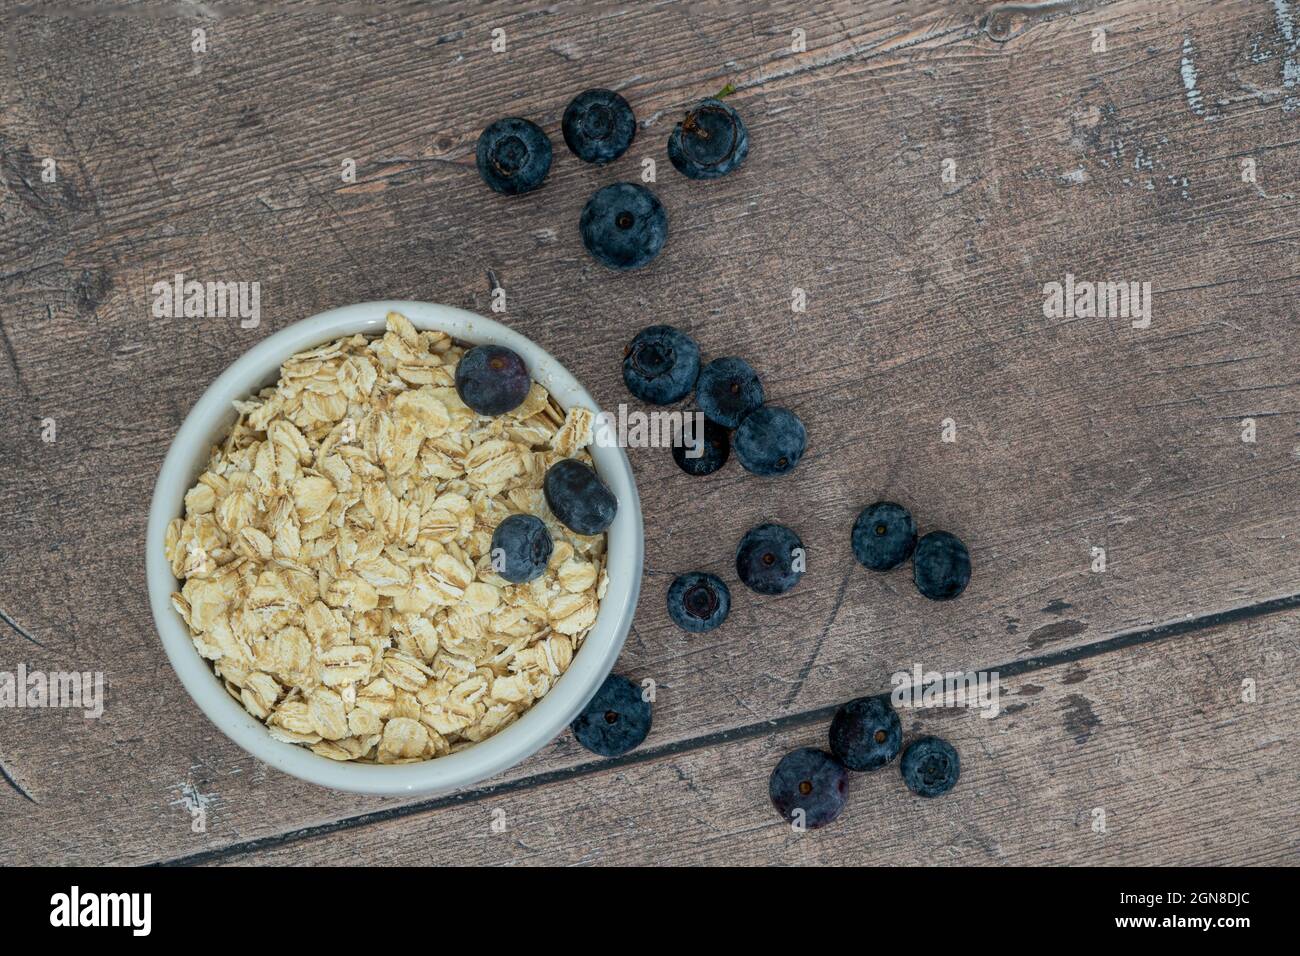 Ramekin of hot rolled oats and blueberrries on a wooden background Stock Photo